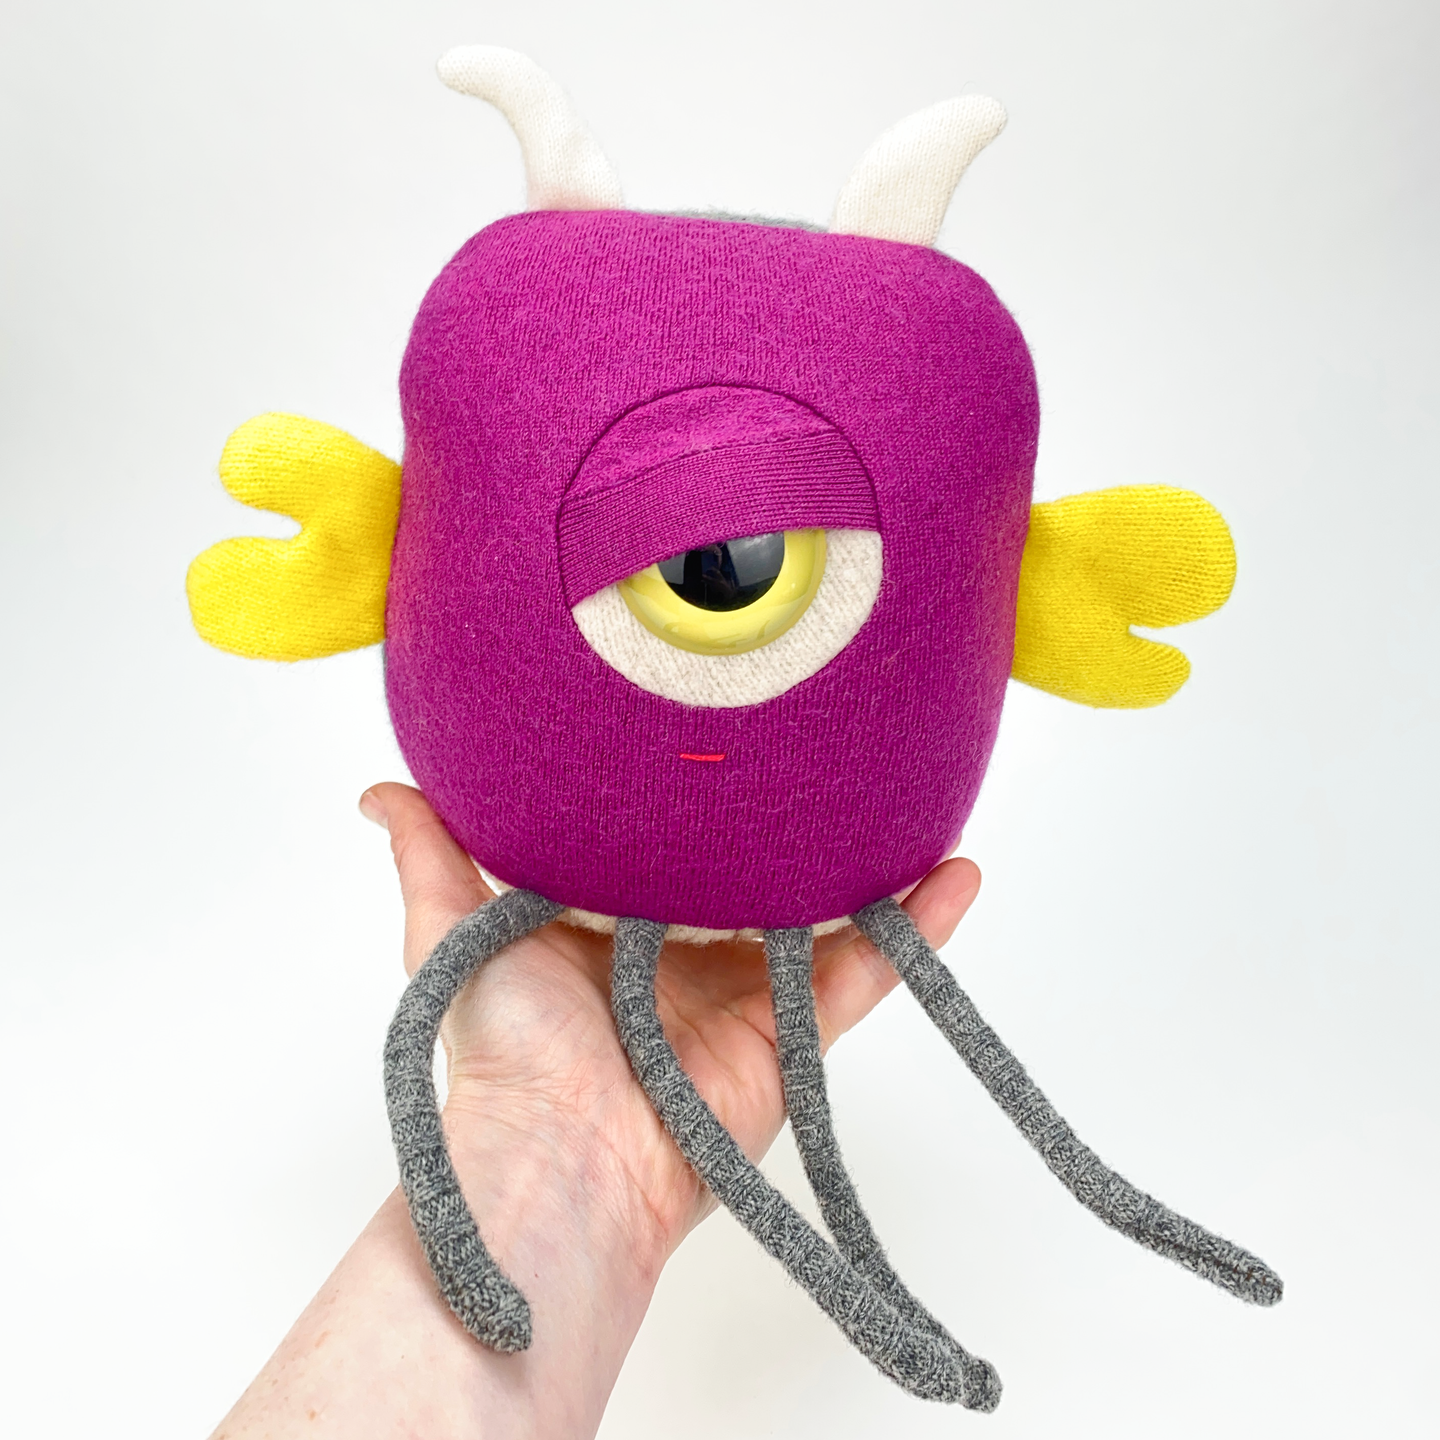 Doodle the cyclops monster plush stuffy with wings